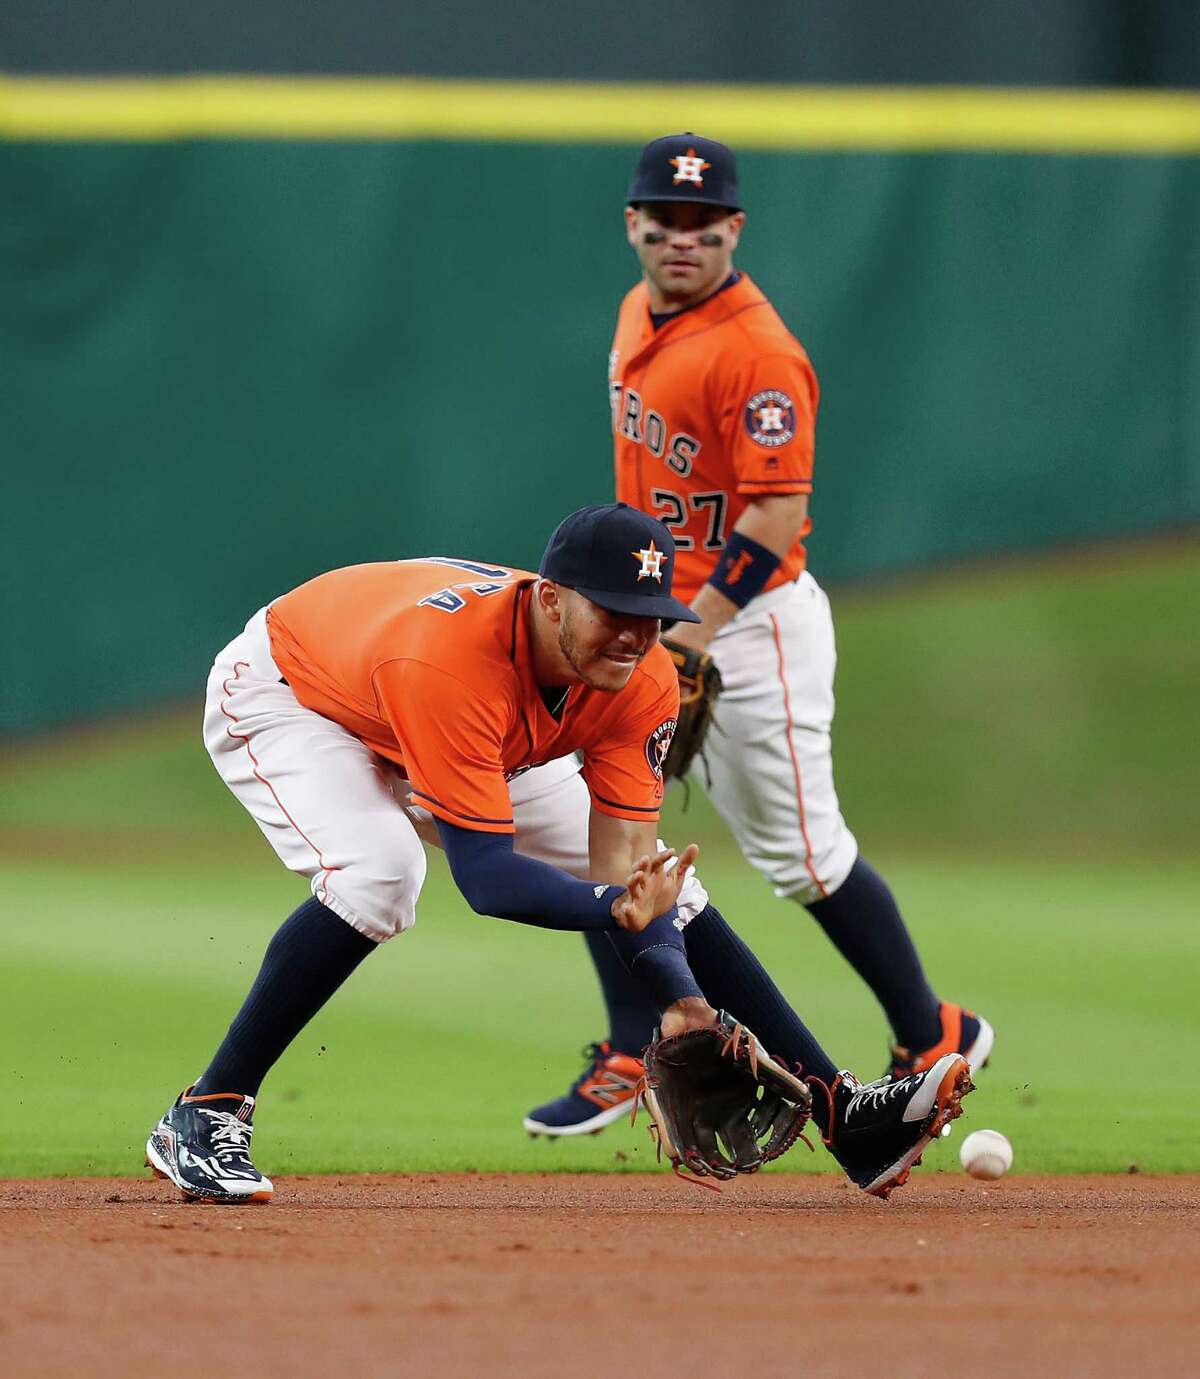 Astros shortstop Carlos Correa fields Mike Trout's grounder during the first inning Saturday. Correa aggravated a shoulder injury in Friday's loss to the Angels but was back out on the field Saturday at Minute Maid Park.